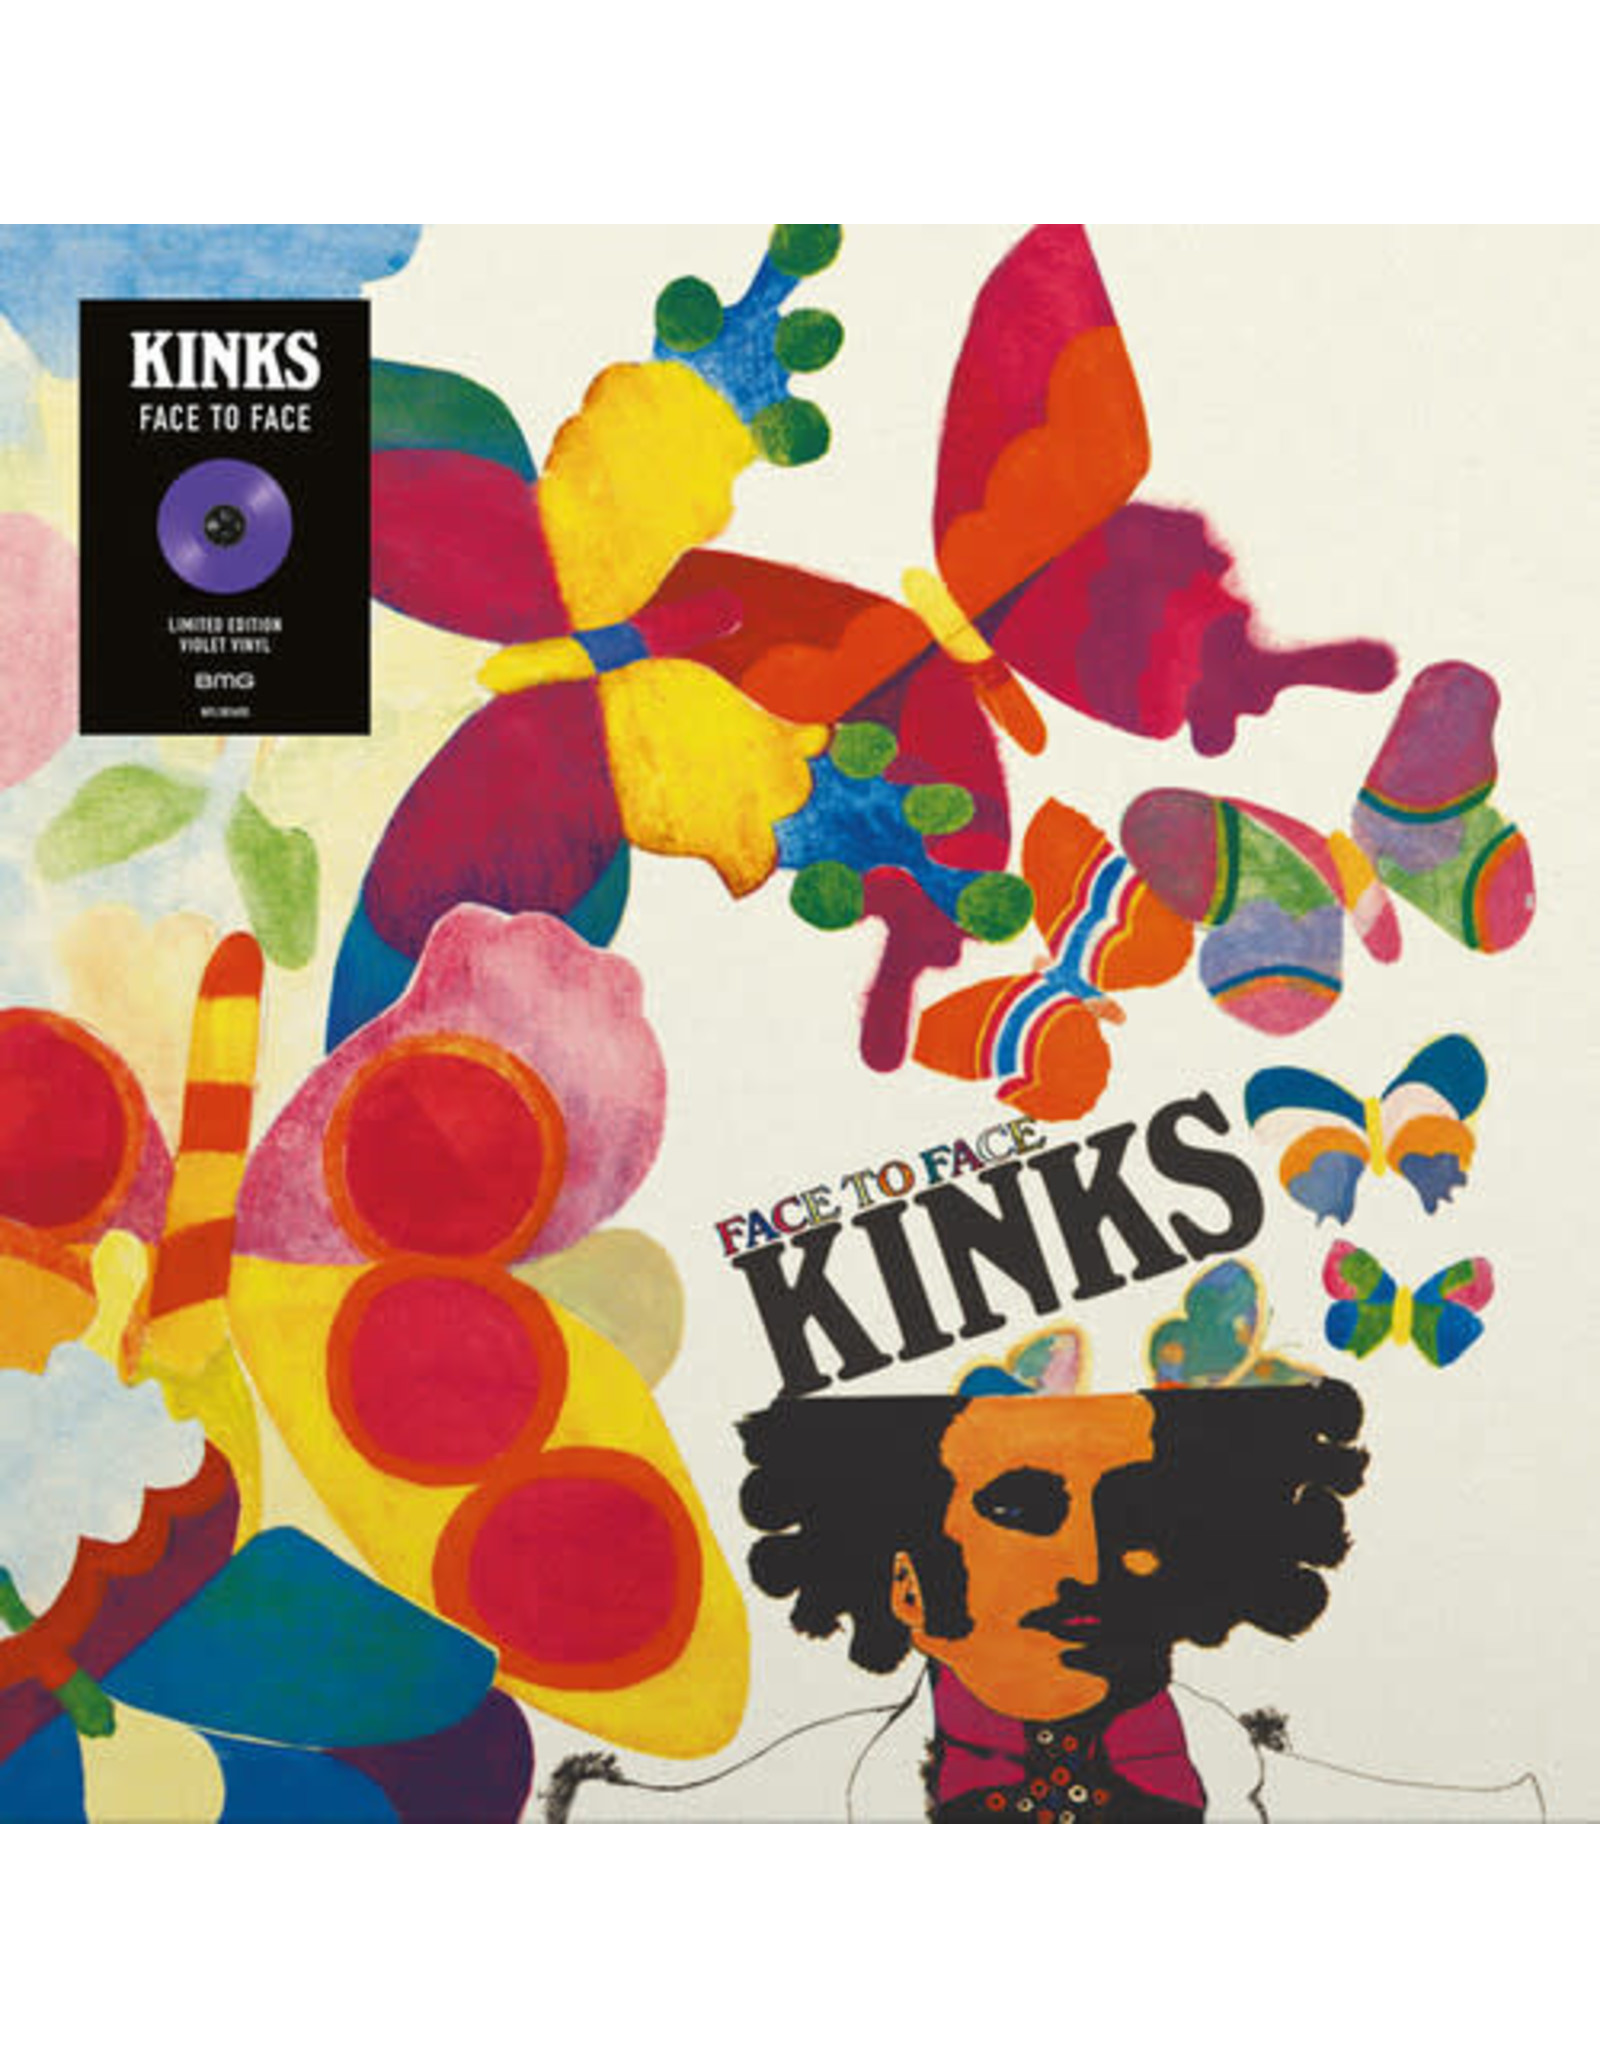 New Vinyl The Kinks - Face To Face (180g, Limited Edition, Purple) LP